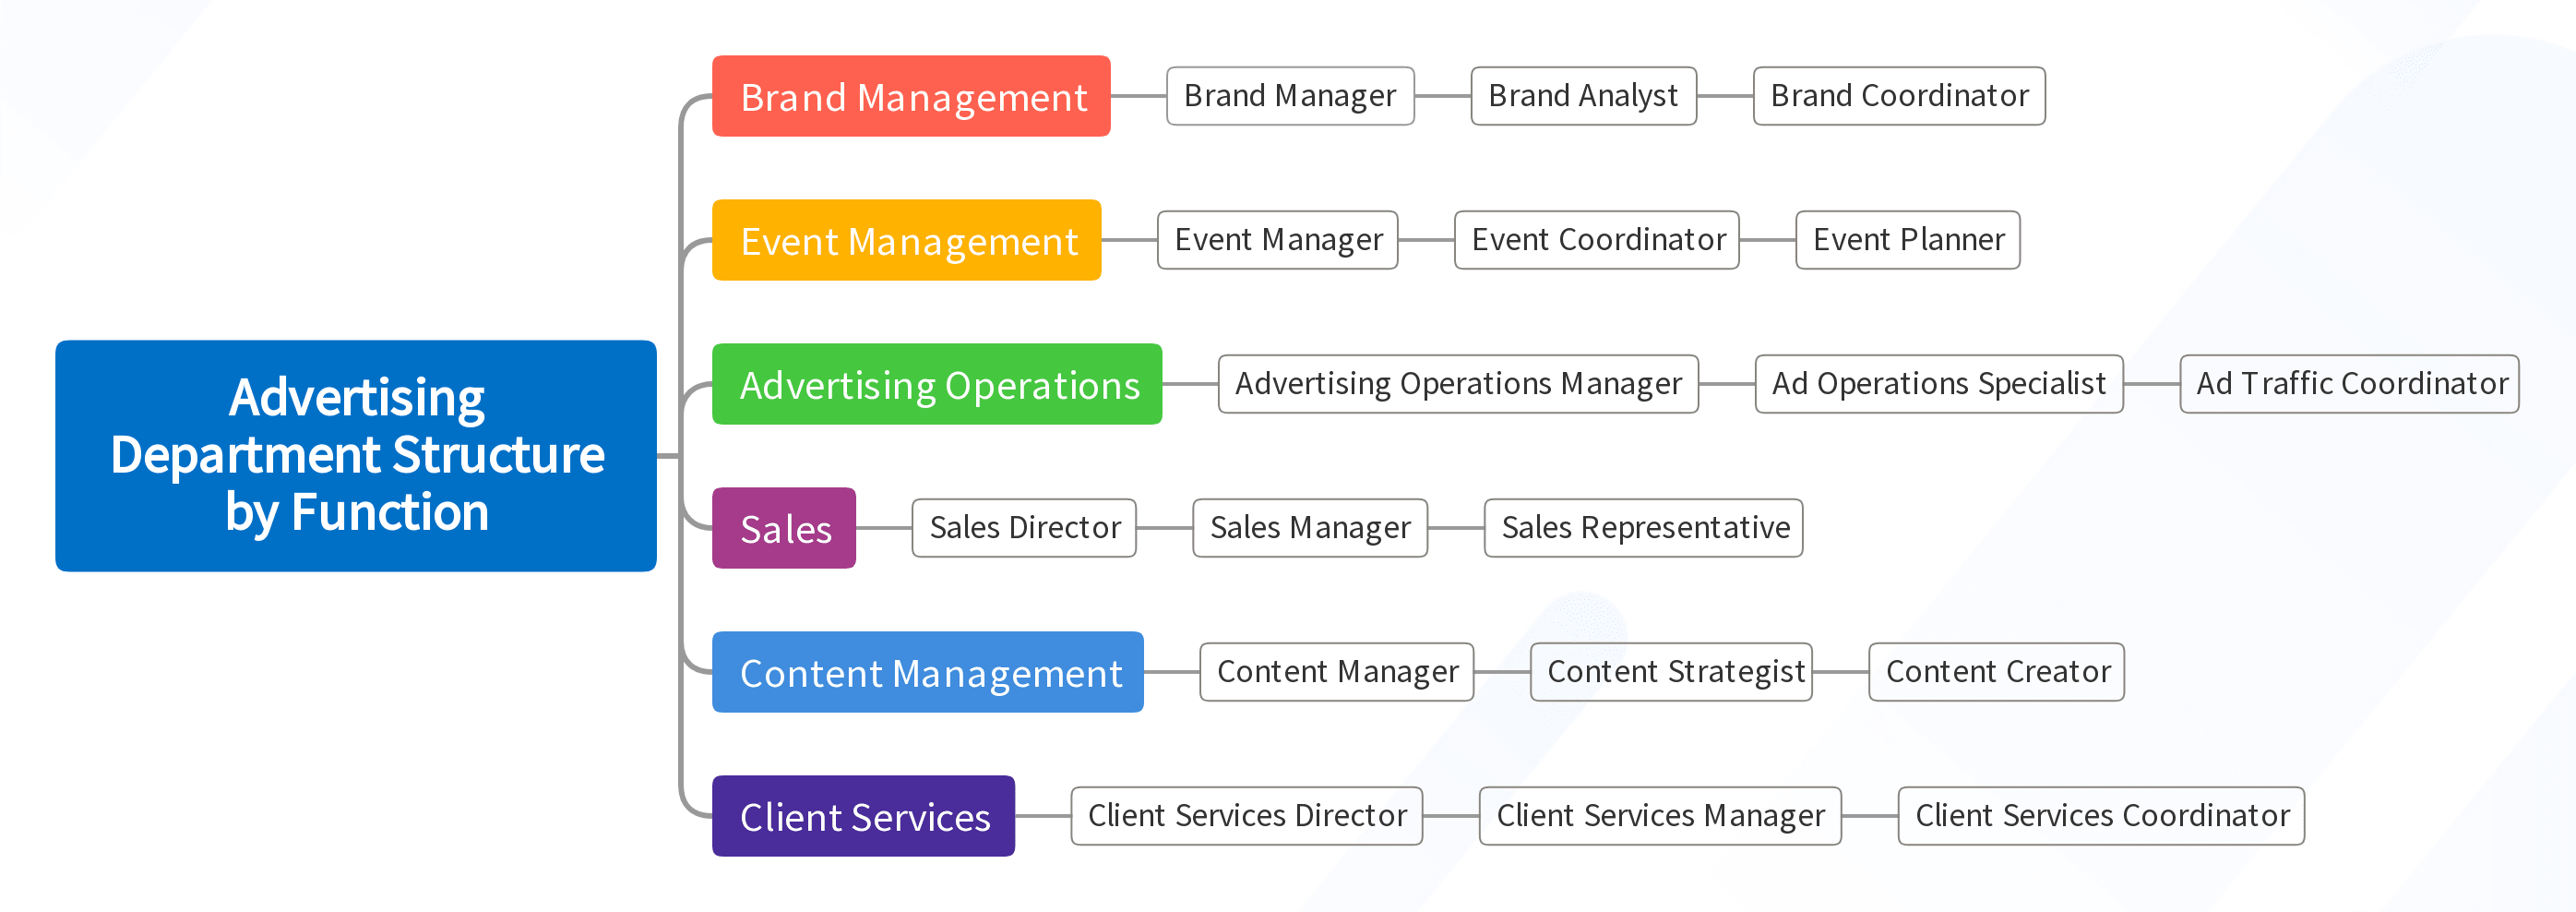 Advertising Department Structure by Function